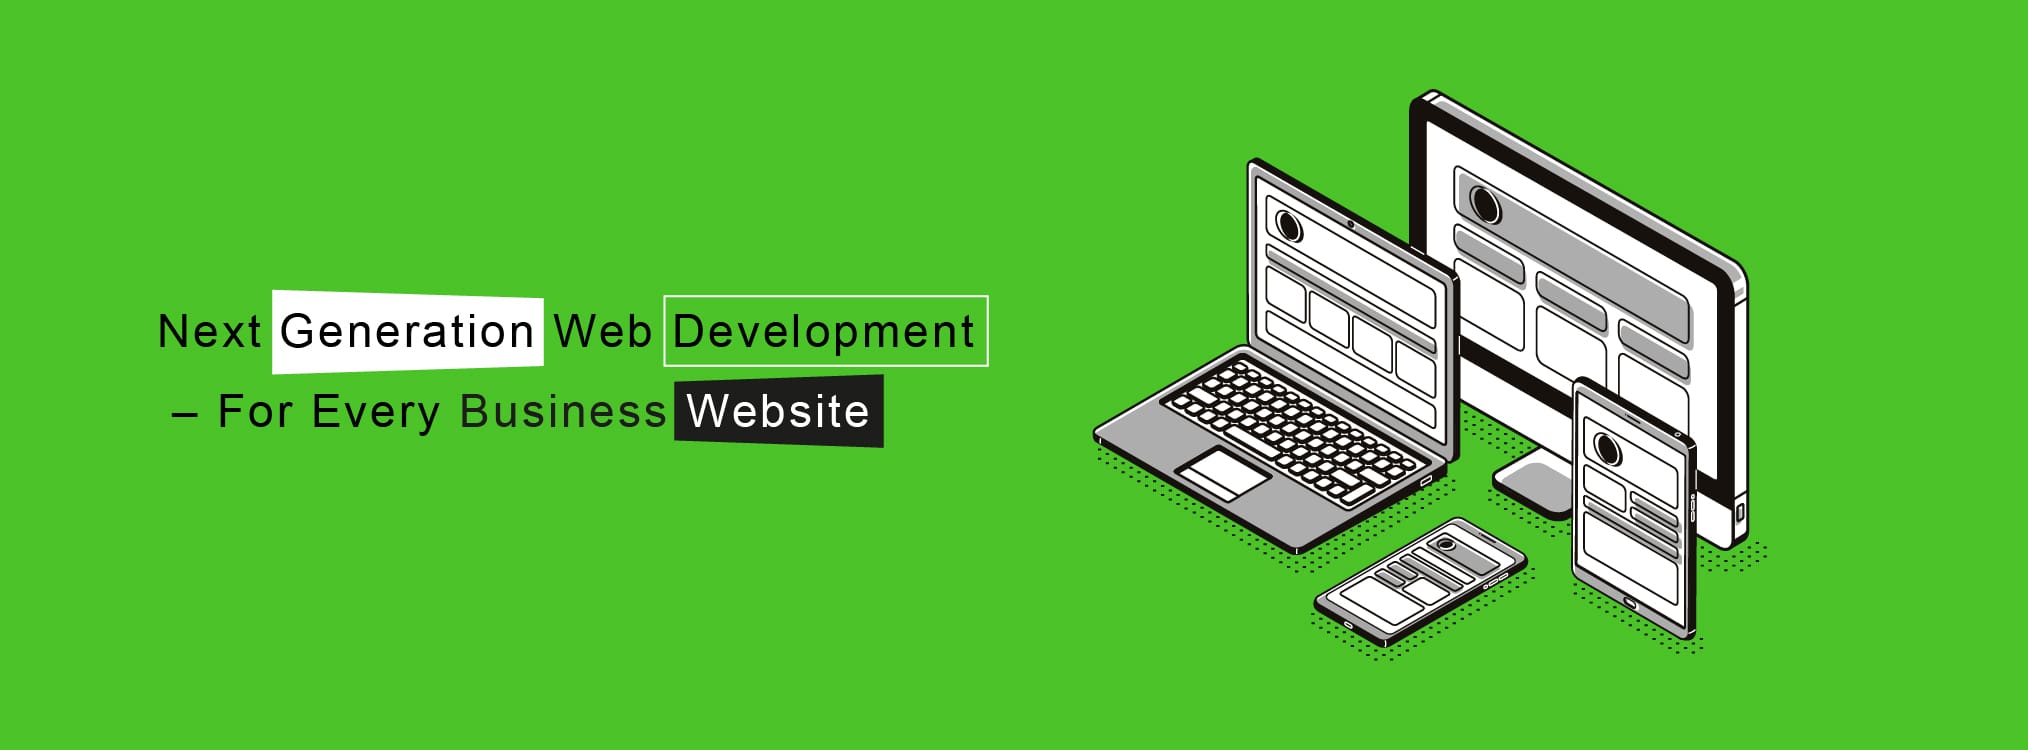 The Next Generation of Web Development for Global Businesses